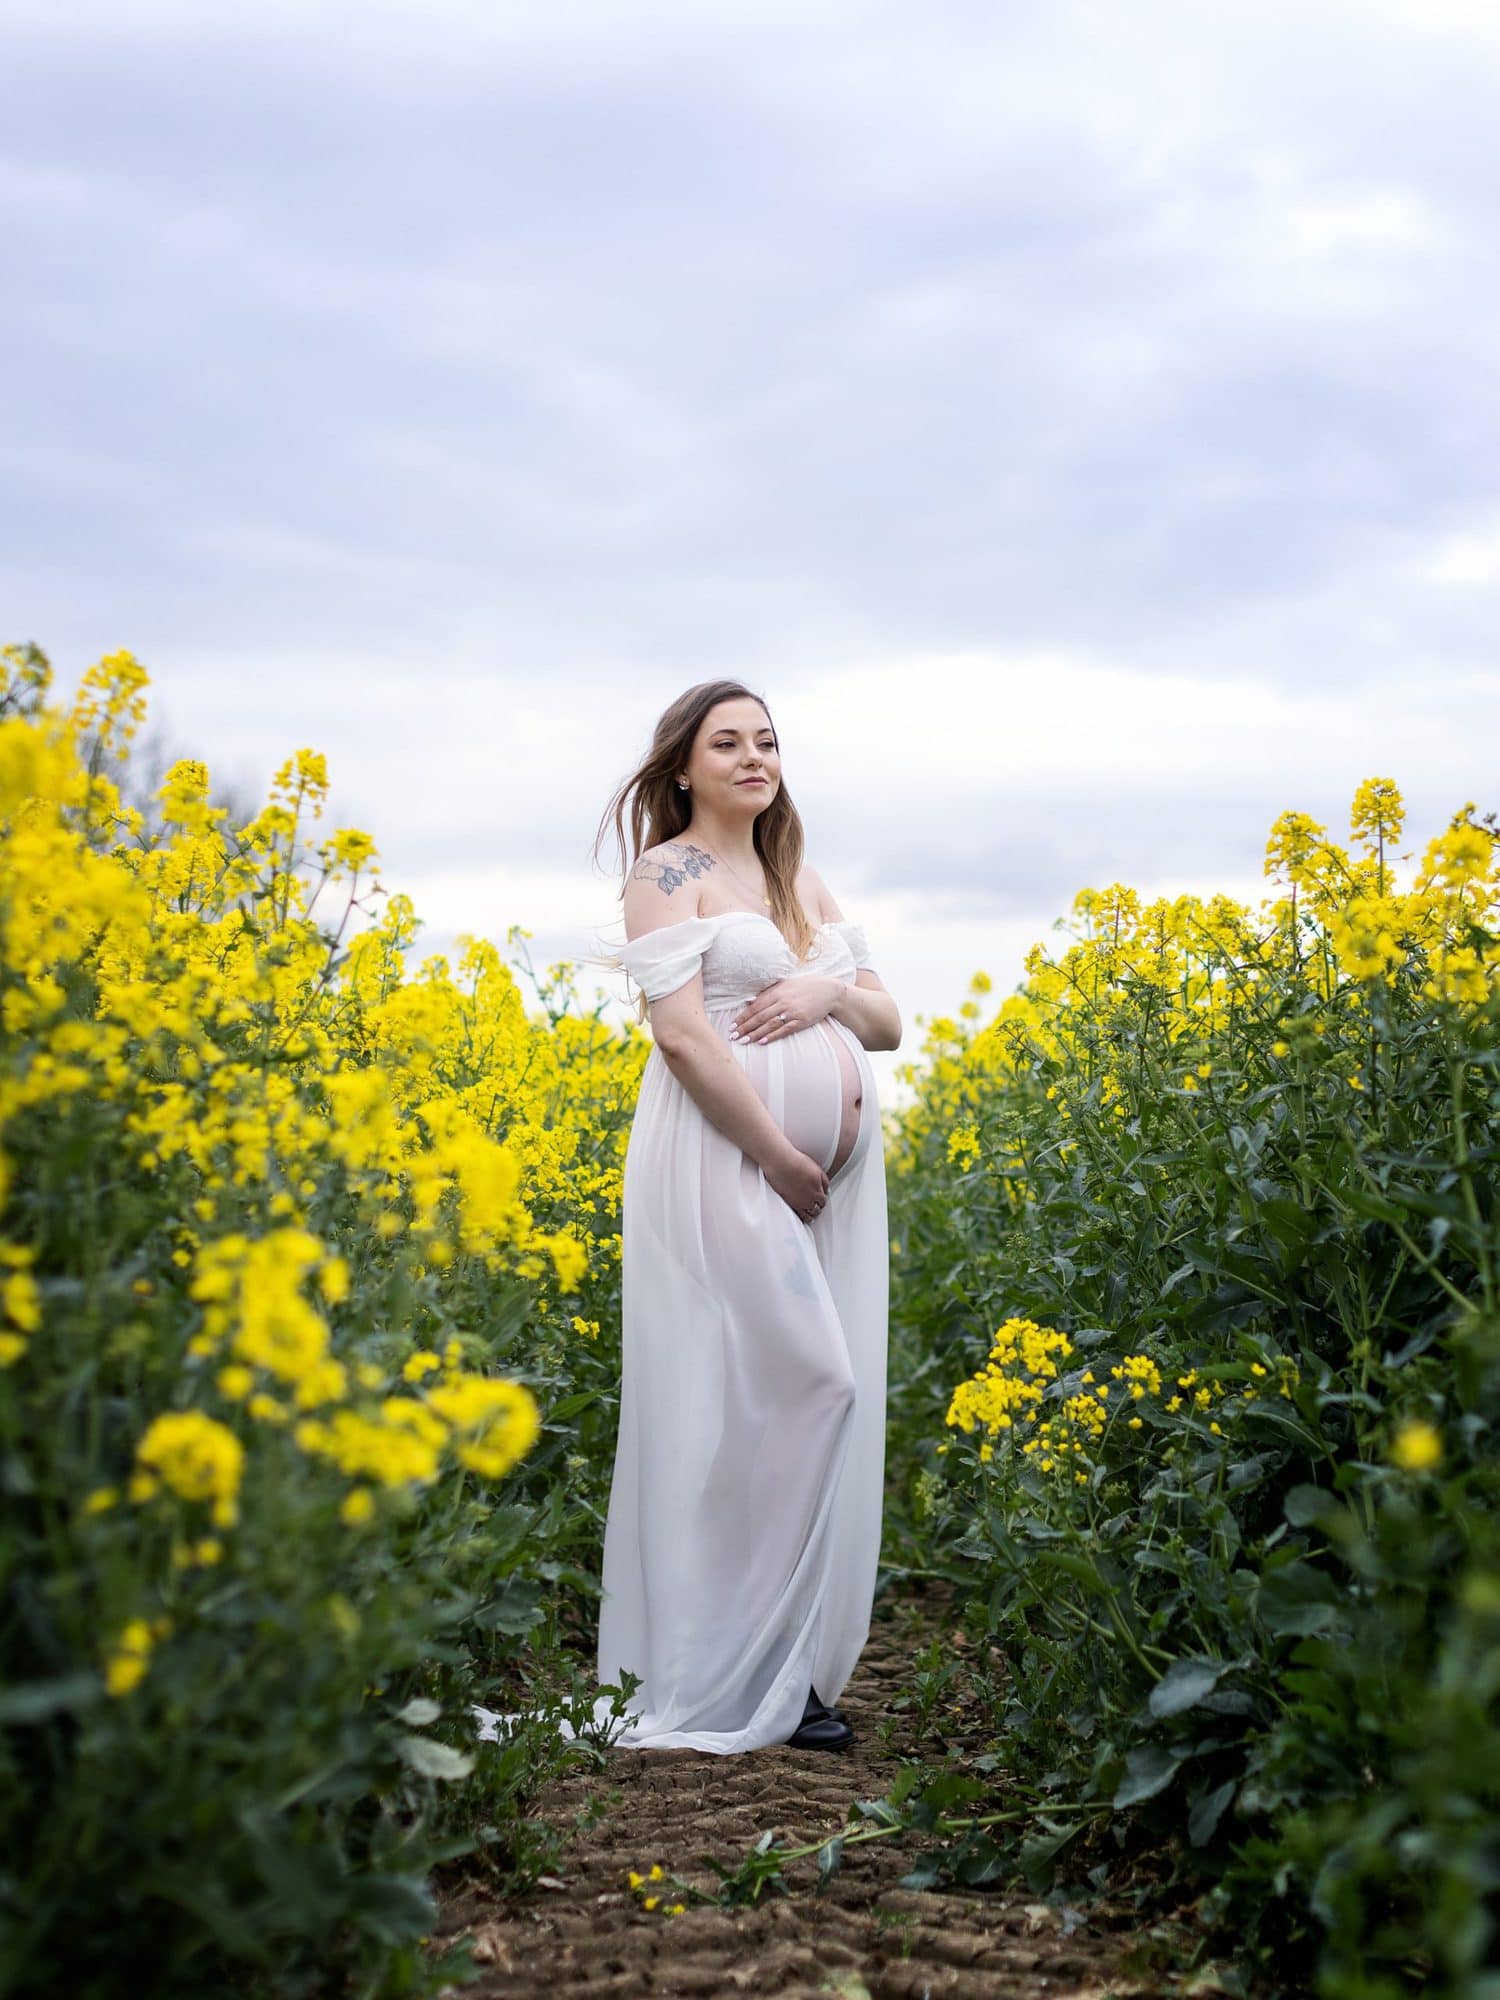 Pregnant lady in white dress poses for Maternity Portrait on Suffolk farm